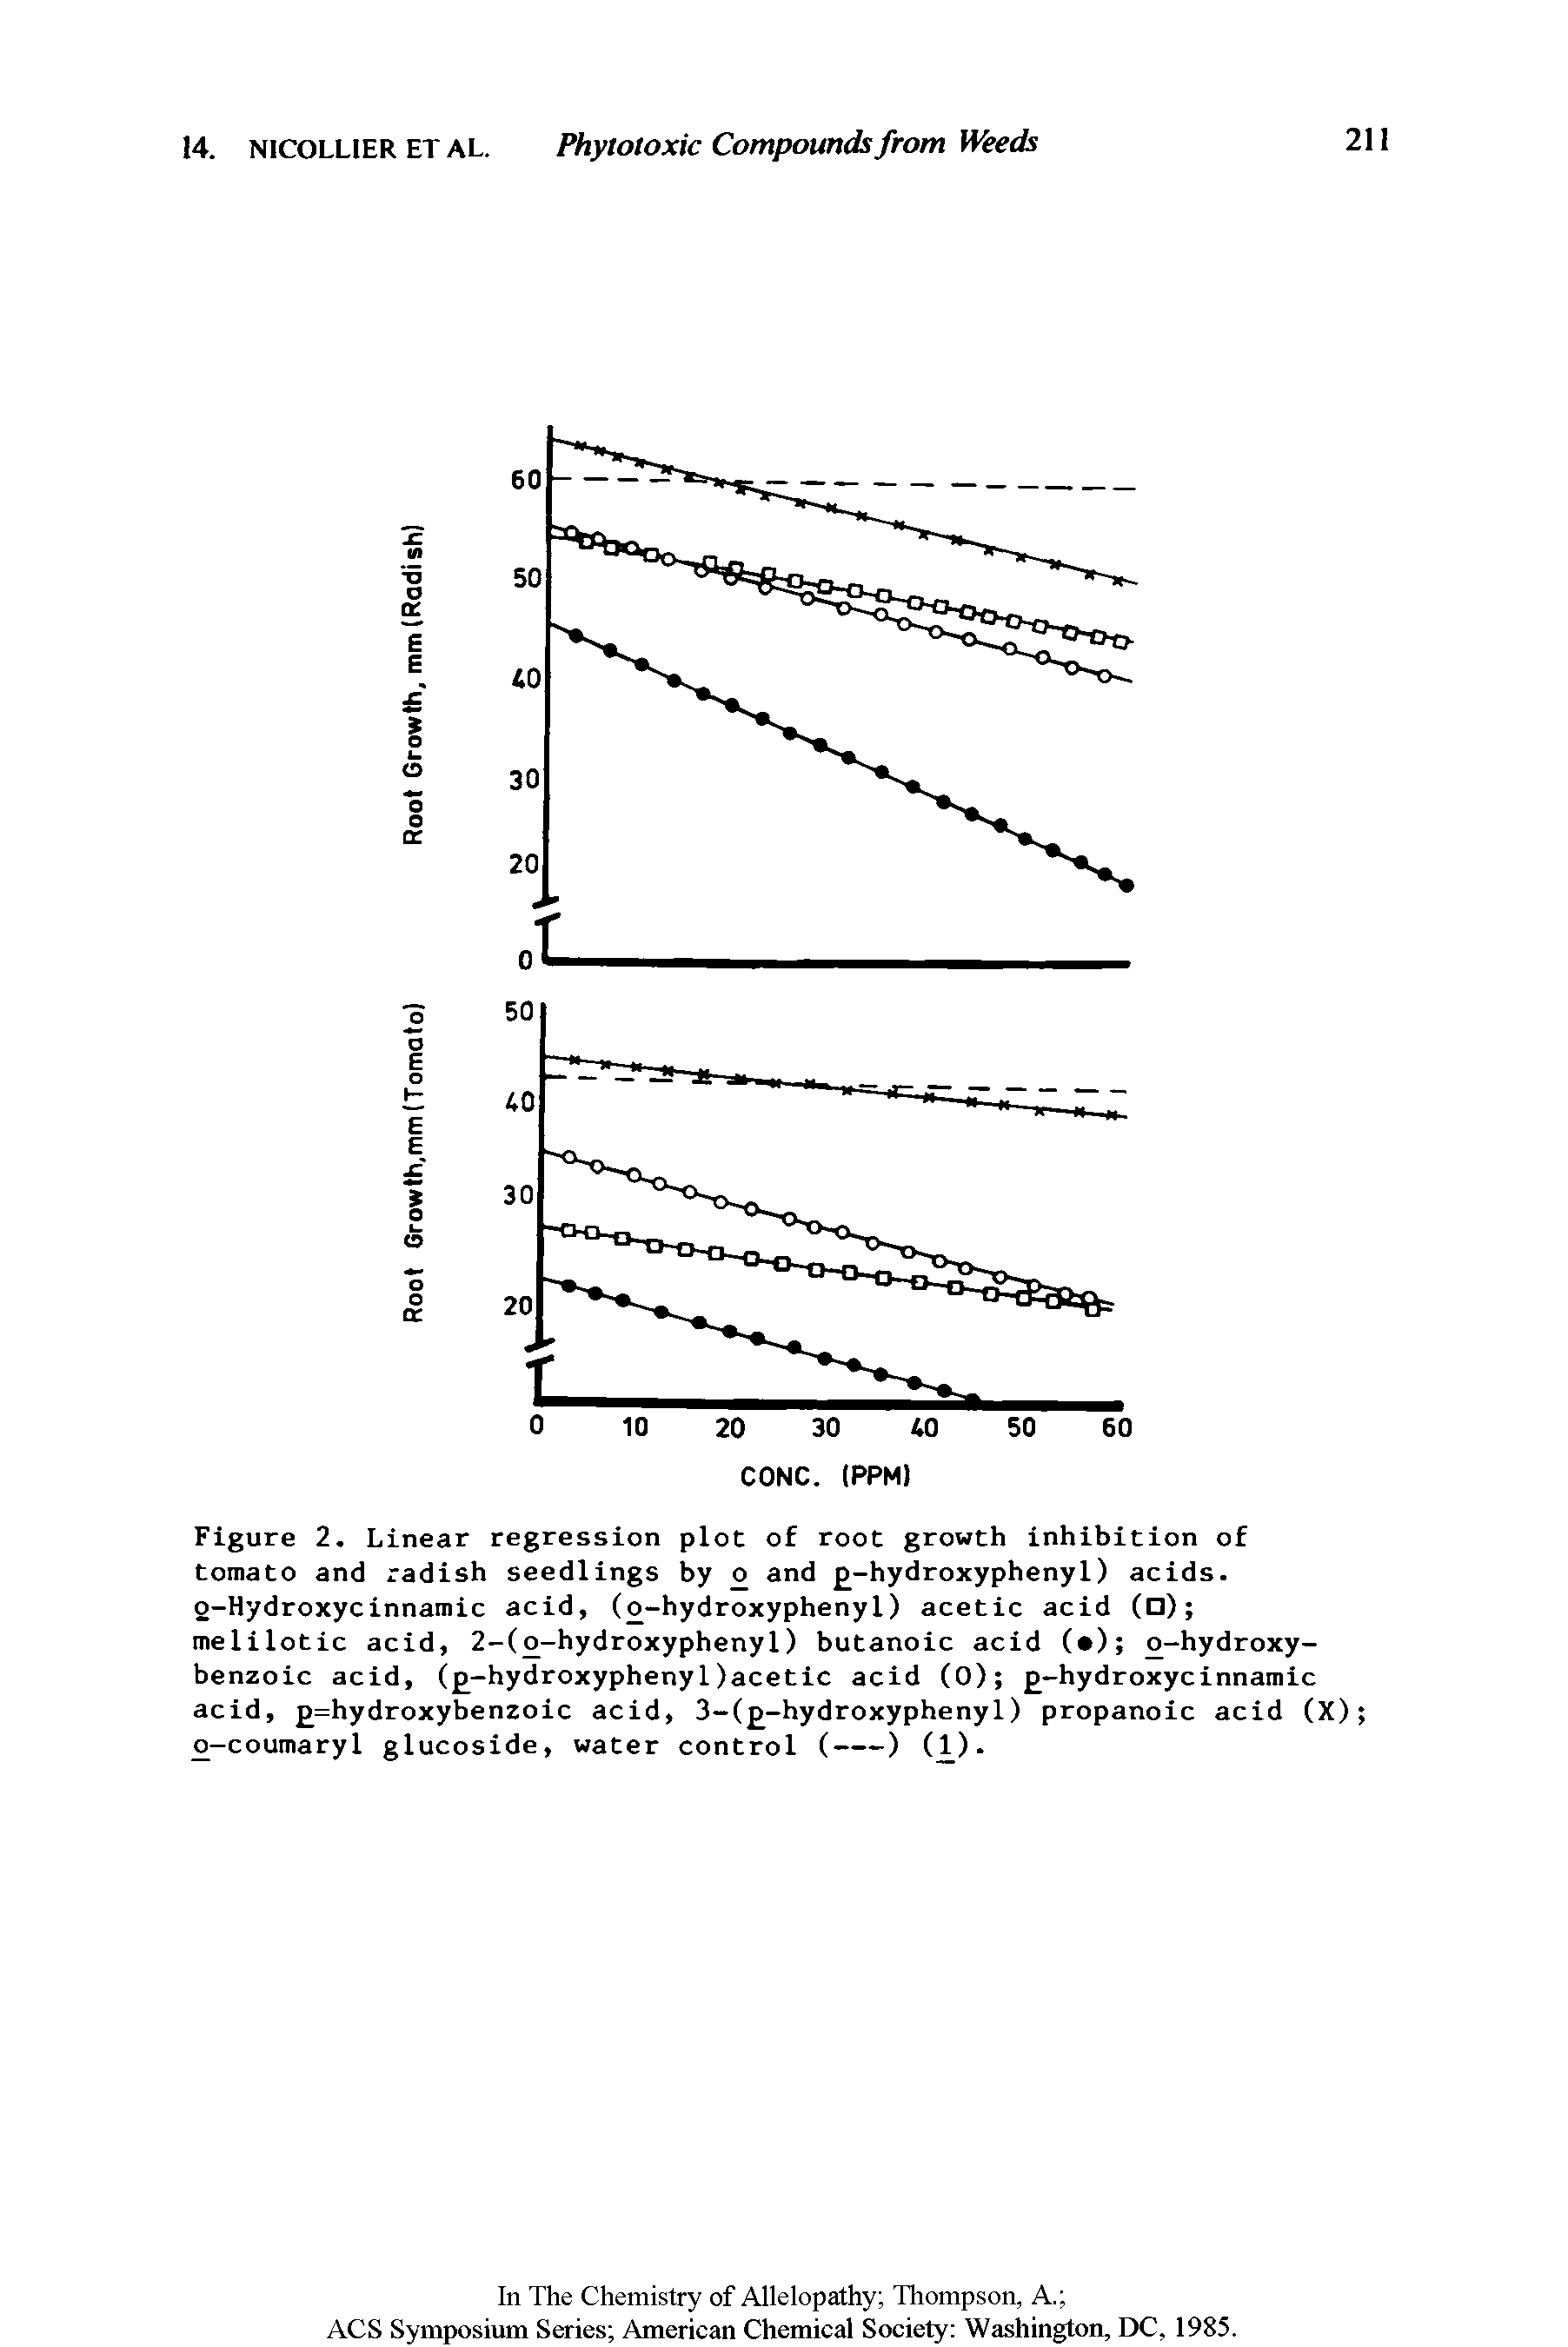 Figure 2. Linear regression plot of root growth inhibition of tomato and radish seedlings by o and -hydroxyphenyl) acids. o-Hydroxycinnamic acid, (o-hydroxyphenyl) acetic acid ( ) melilotic acid, 2-(o-hydroxyphenyl) butanoic acid ( ) o-hydroxy-benzoic acid, ( -hydroxypheny 1 )acetic acid (0) -hydroxycinnamic acid, =hydroxybenzoic acid, 3-( -hydroxyphenyl) propanoic acid (X) o-coumaryl glucoside, water control (----) (1 ). ...